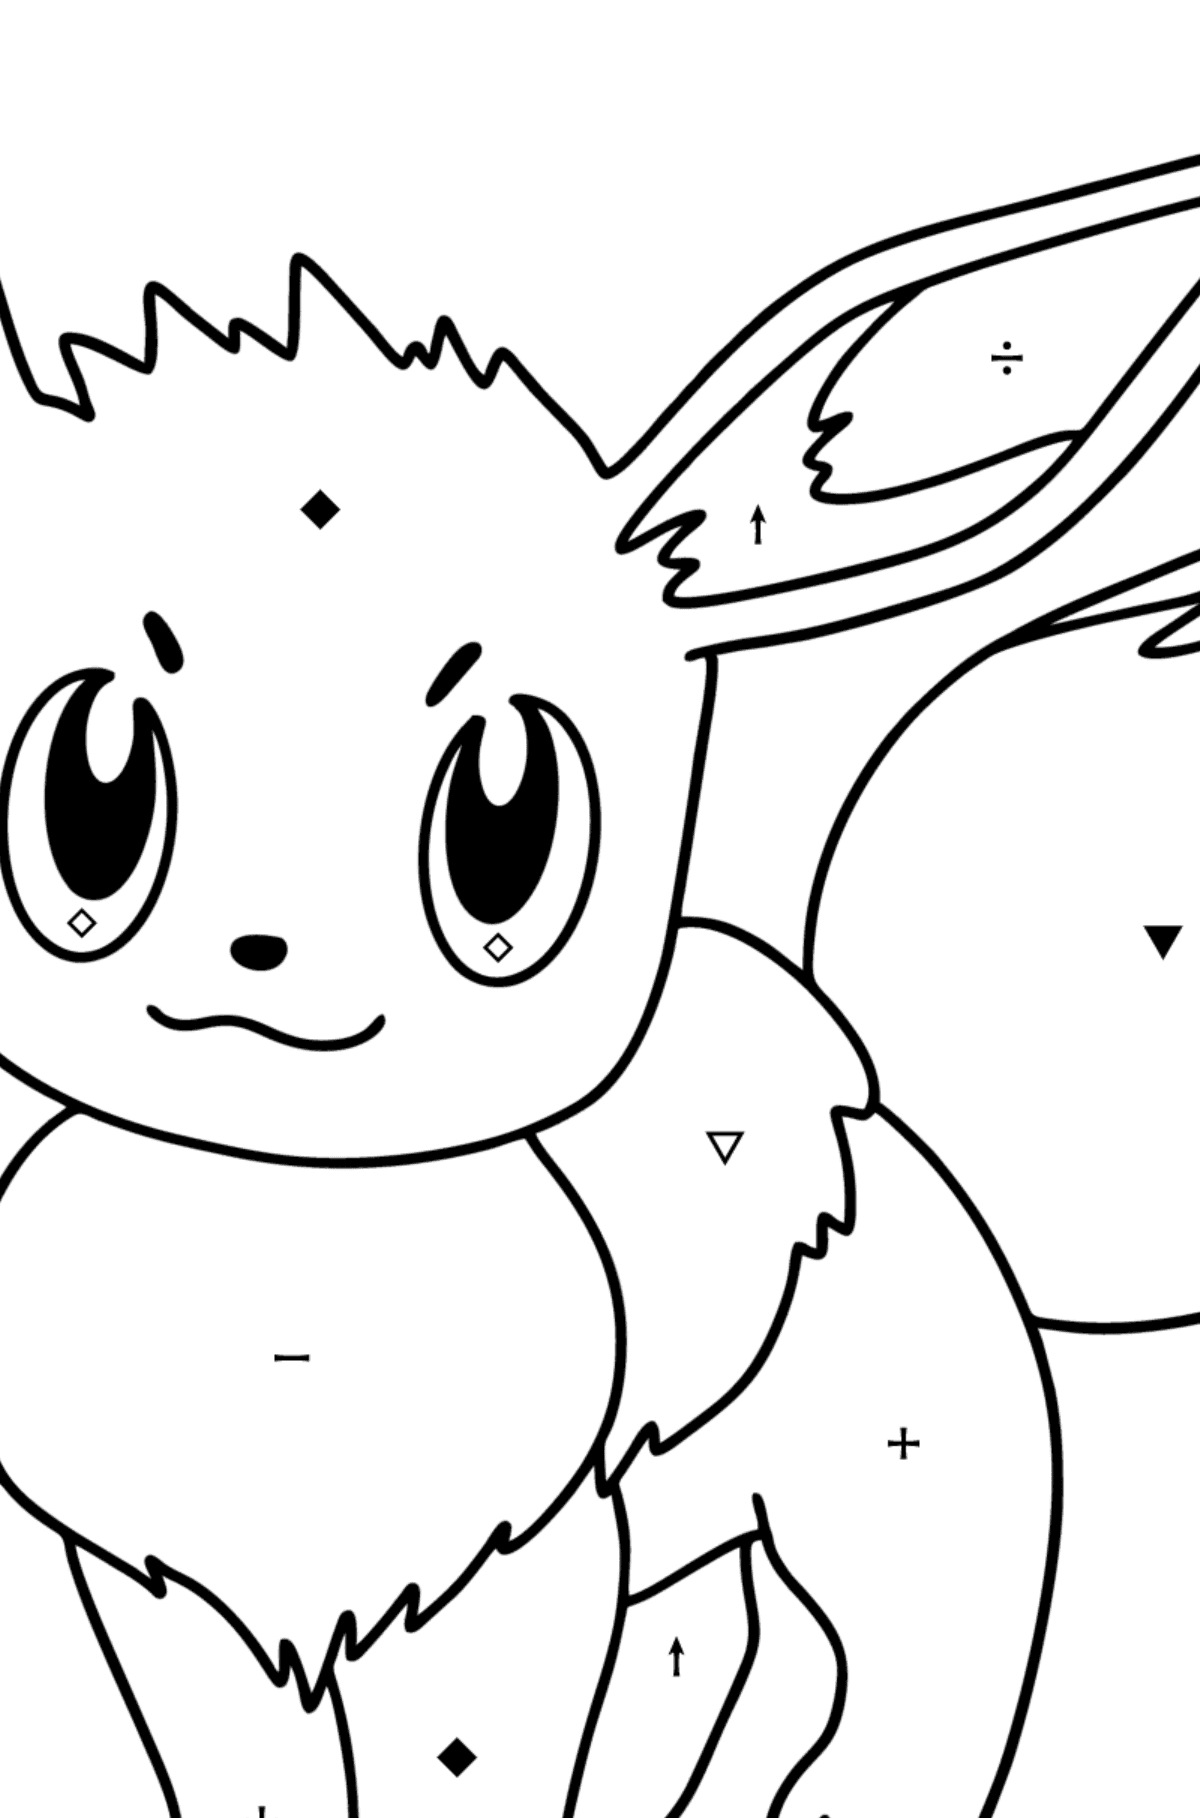 Pokemon Go Eevee coloring page - Coloring by Symbols for Kids